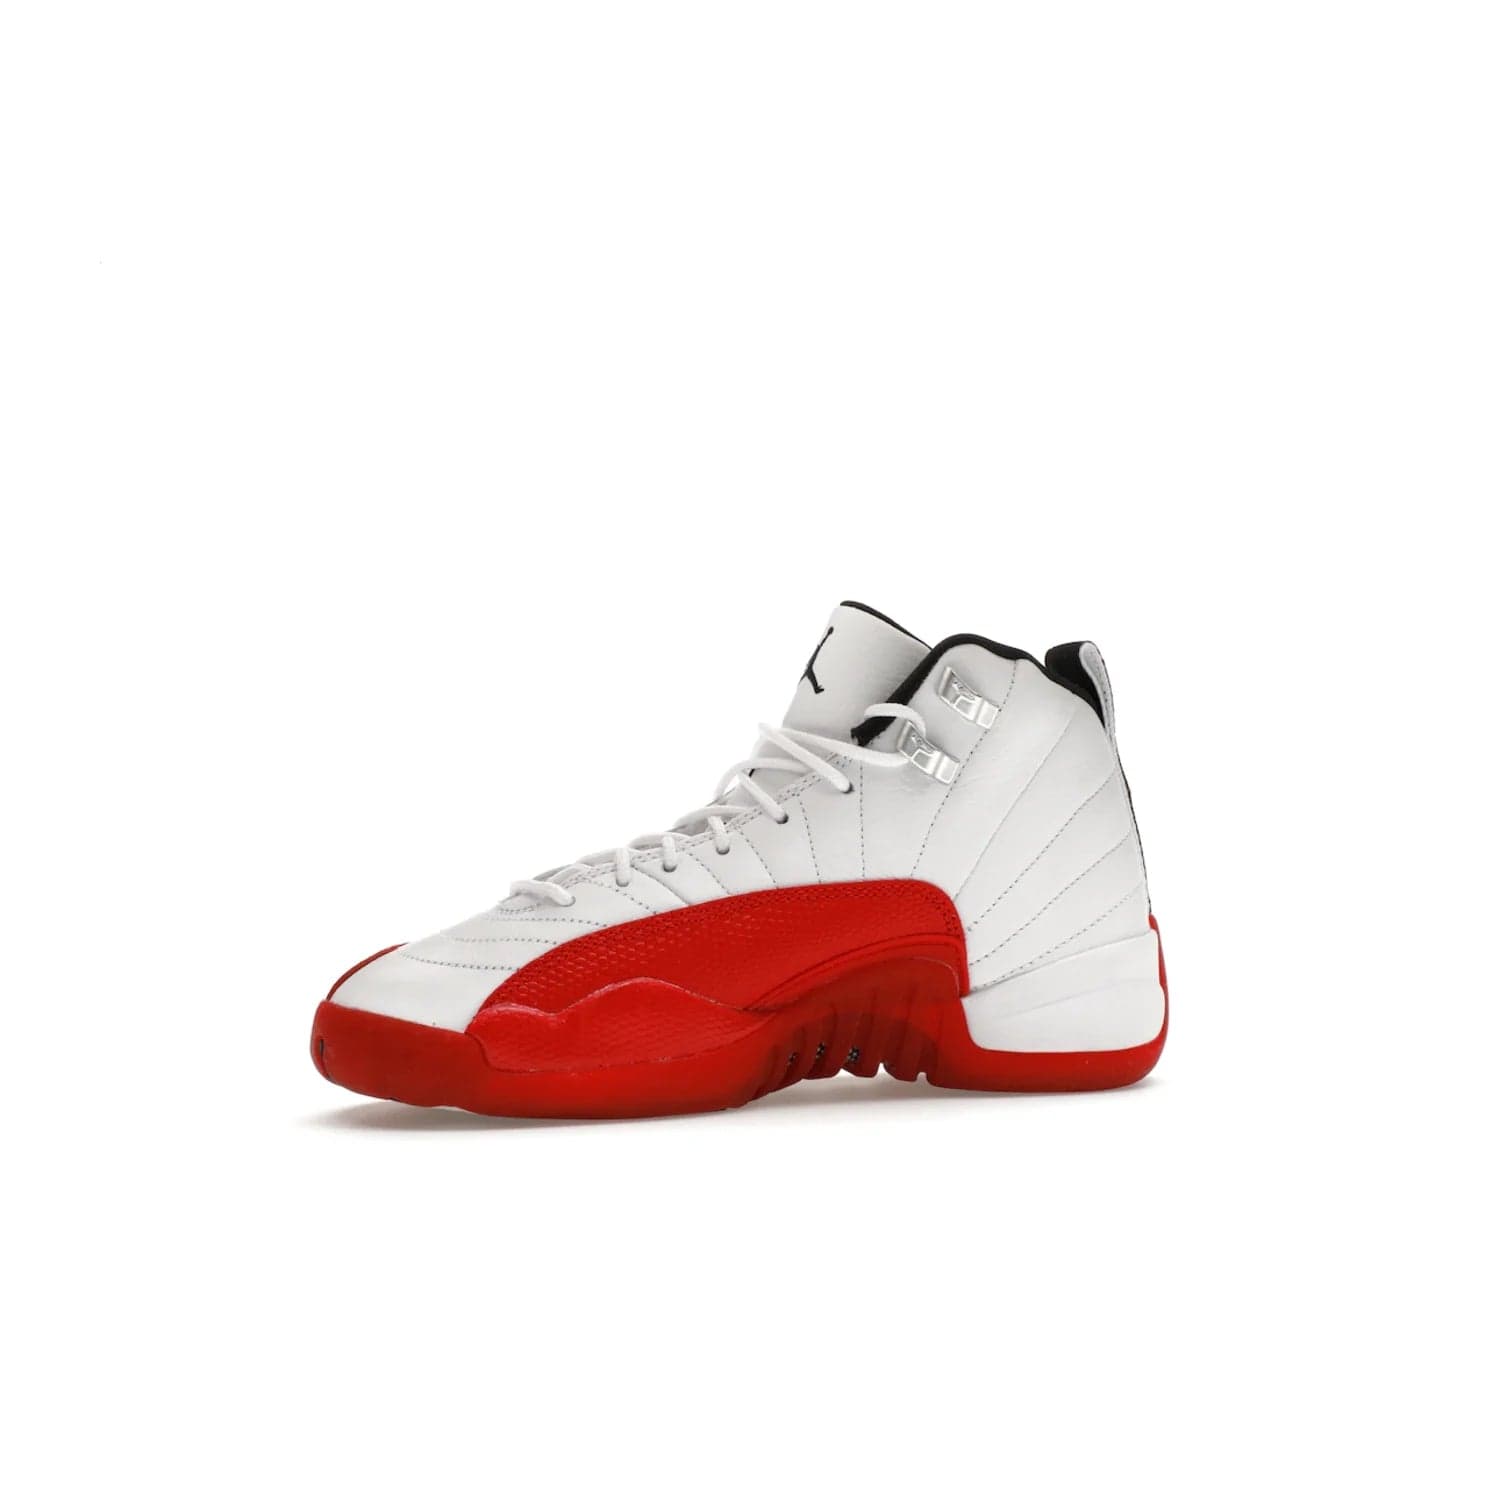 Jordan 12 Retro Cherry (2023) (GS) - Image 17 - Only at www.BallersClubKickz.com - Grab the Jordan 12 Retro Cherry (2023) (GS) and show off your signature style with these iconic kicks. Dressed in White, Black and Varsity Red, these timeless kicks are sure to turn heads. Available October 28, 2023.